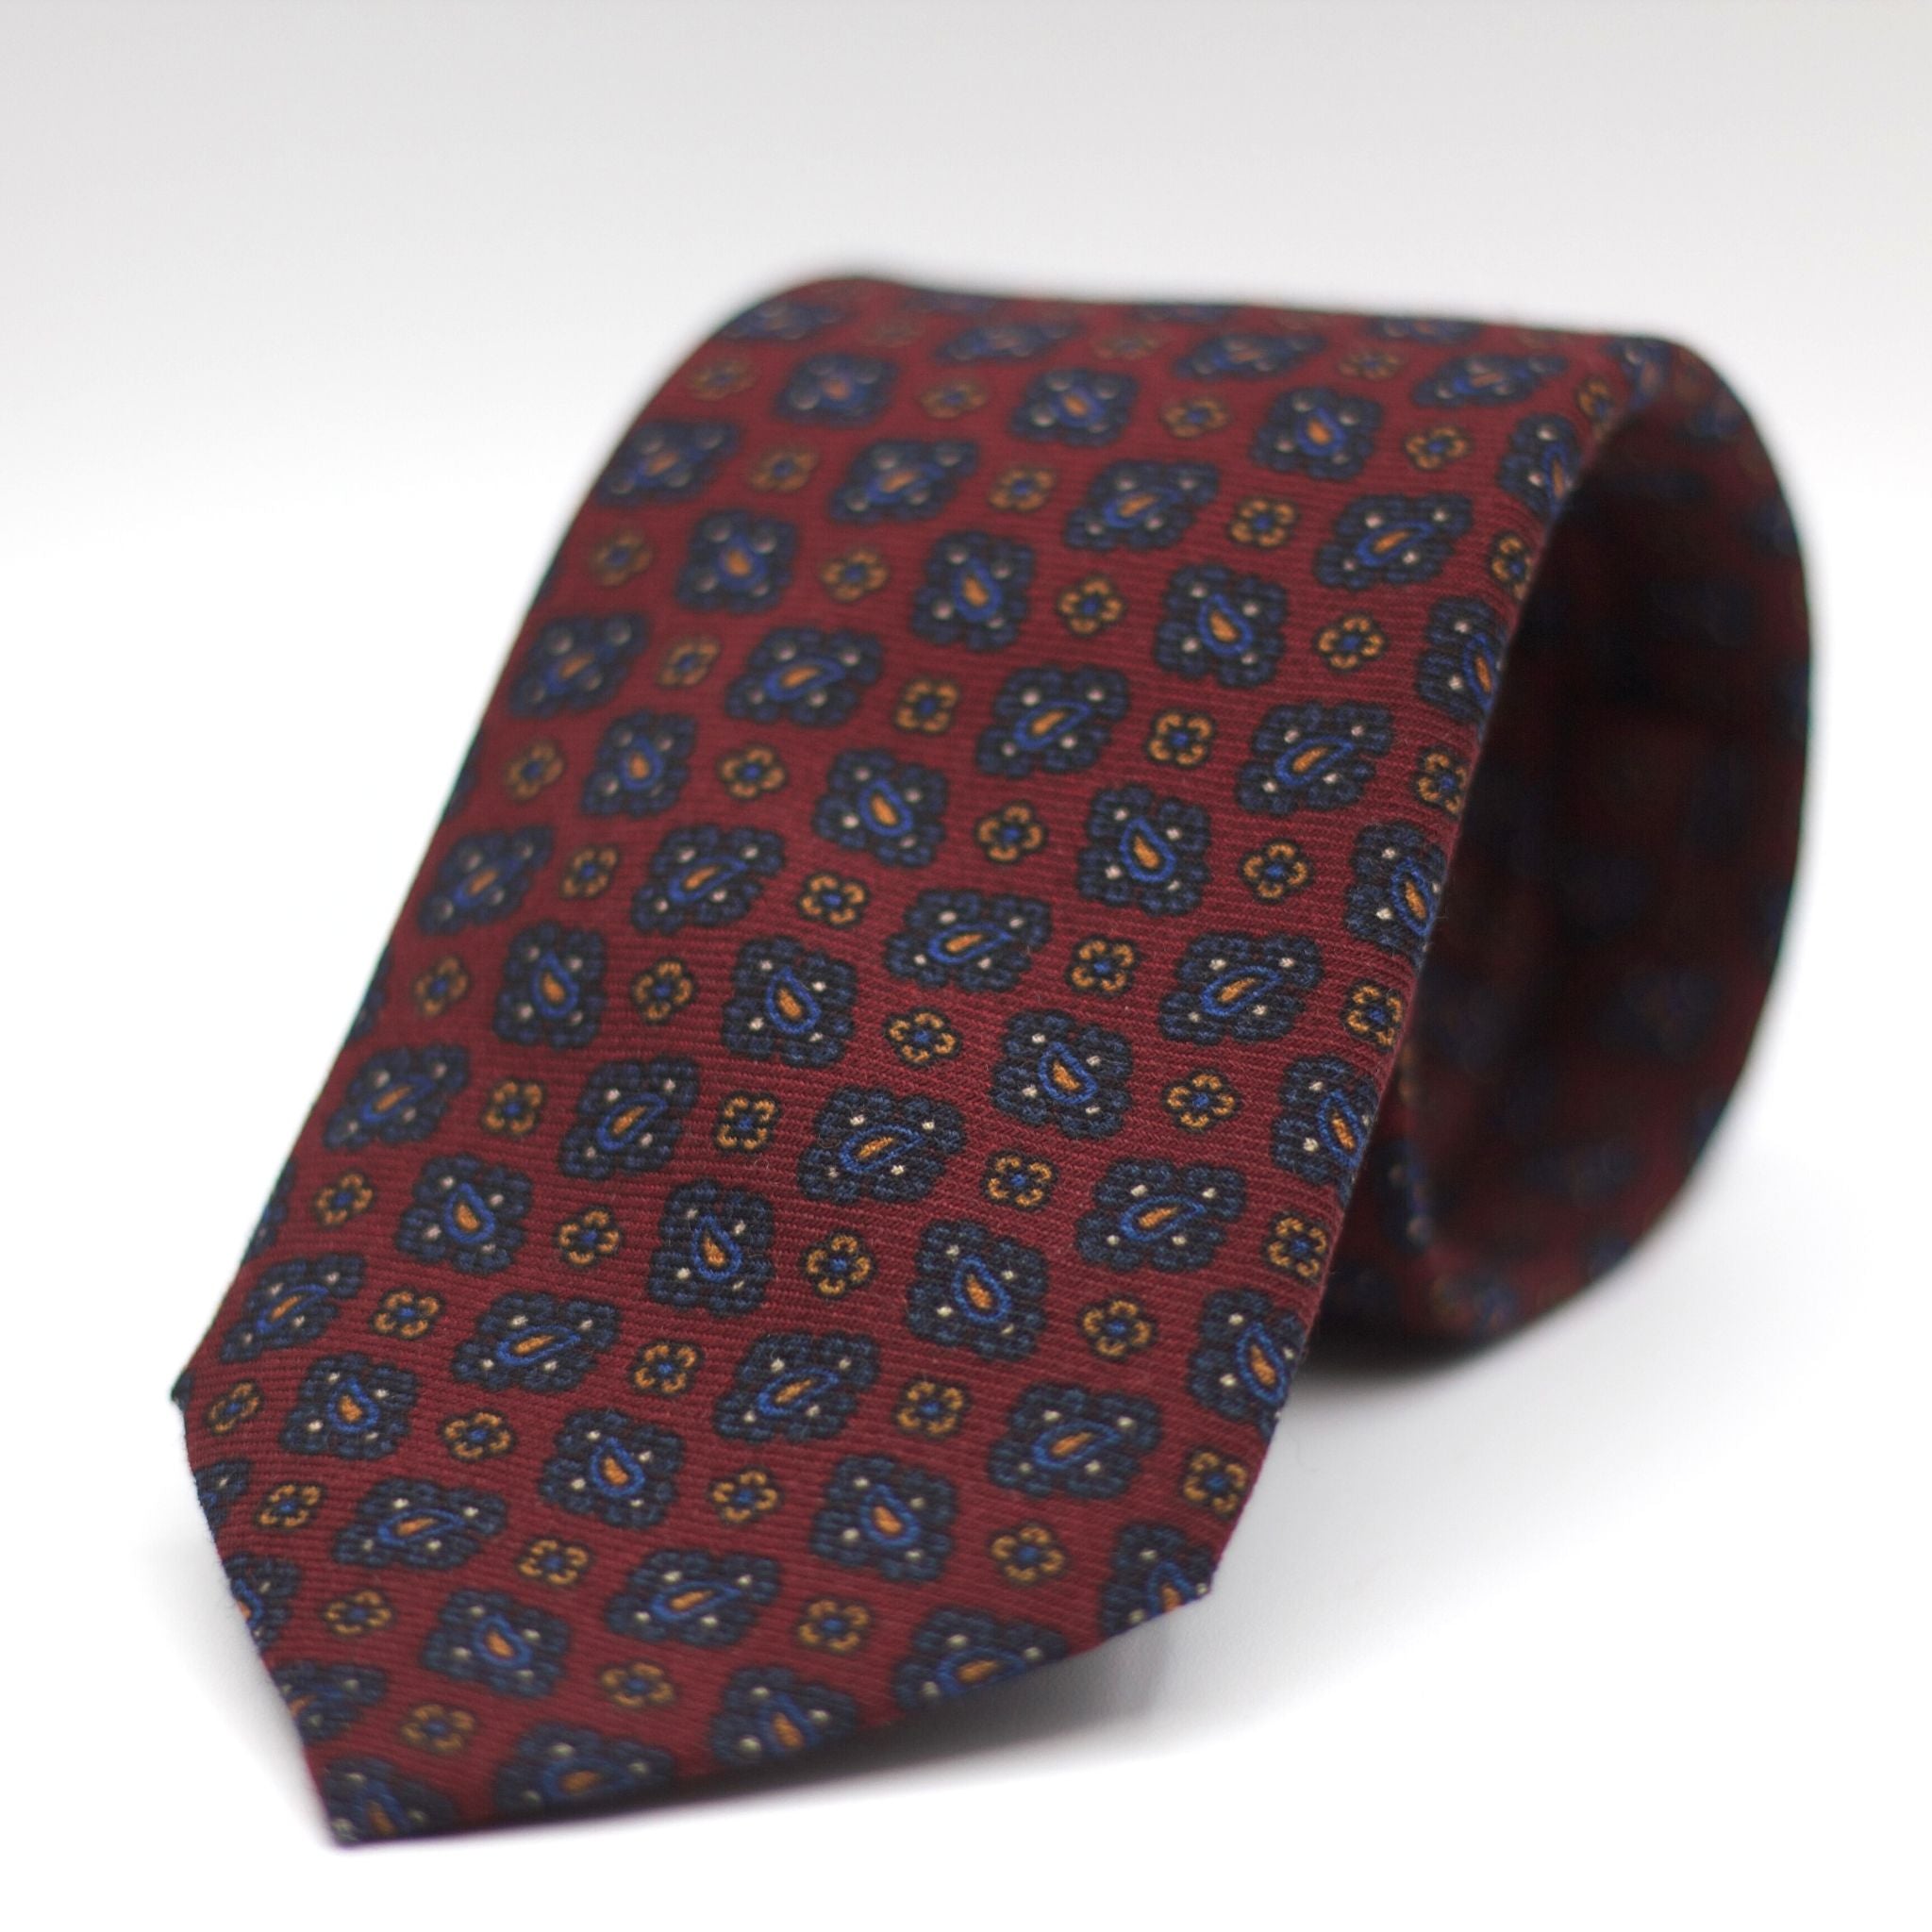 Holliday & Brown for Cruciani & Bella 100% Printed Wool  Self-Tipped Burgundy, Blue, Orange and White Motif Tie Handmade in Italy 8 cm x 148 cm